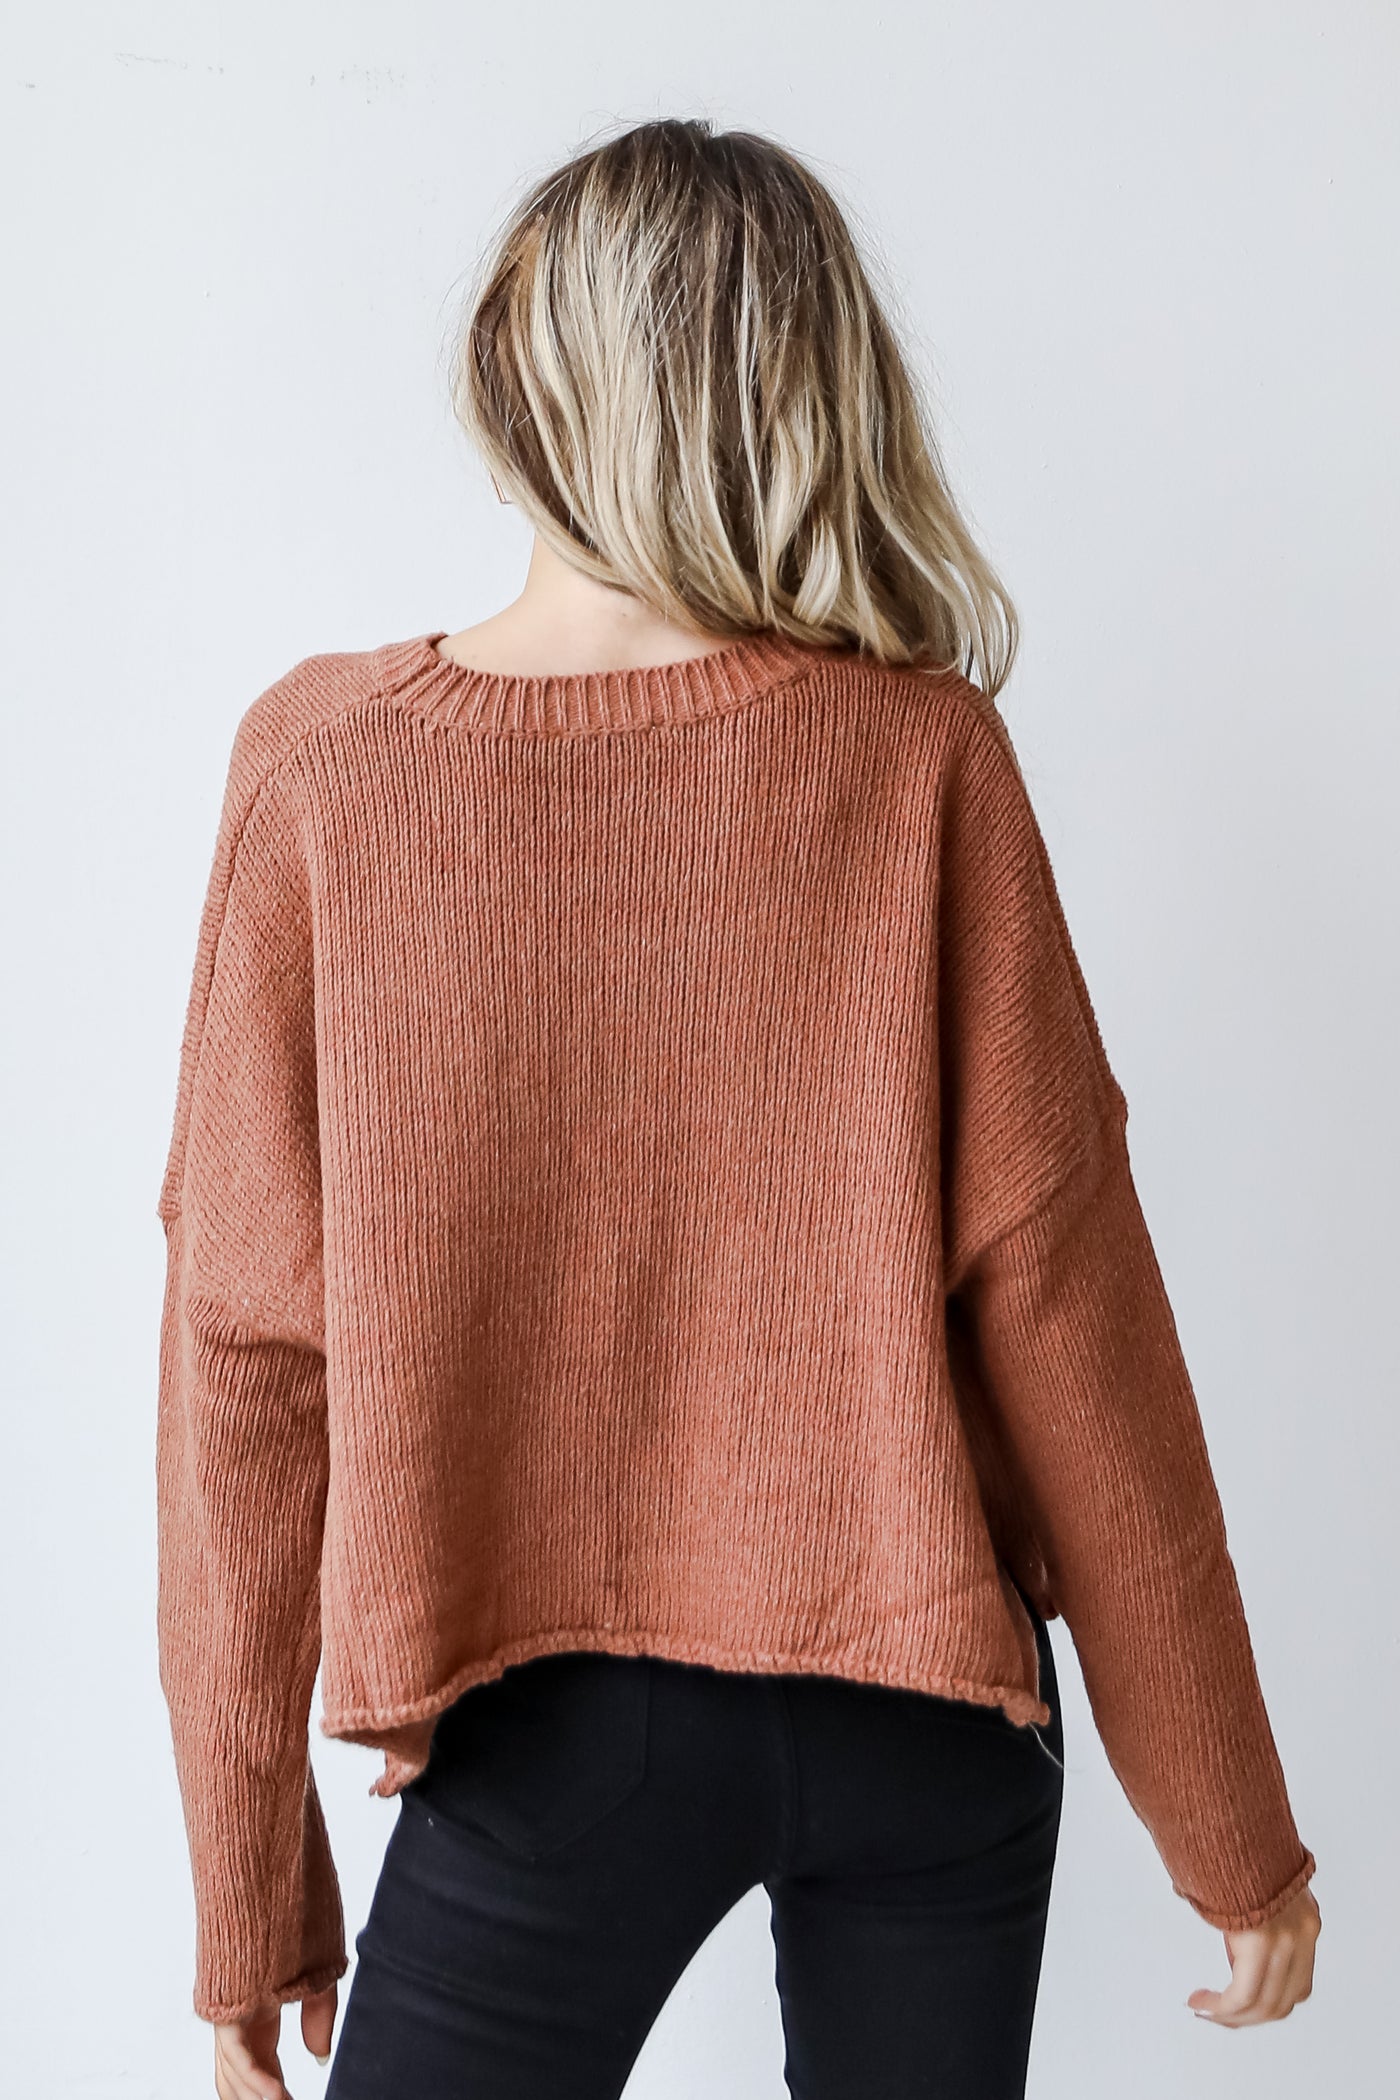 Sweater in rust back view